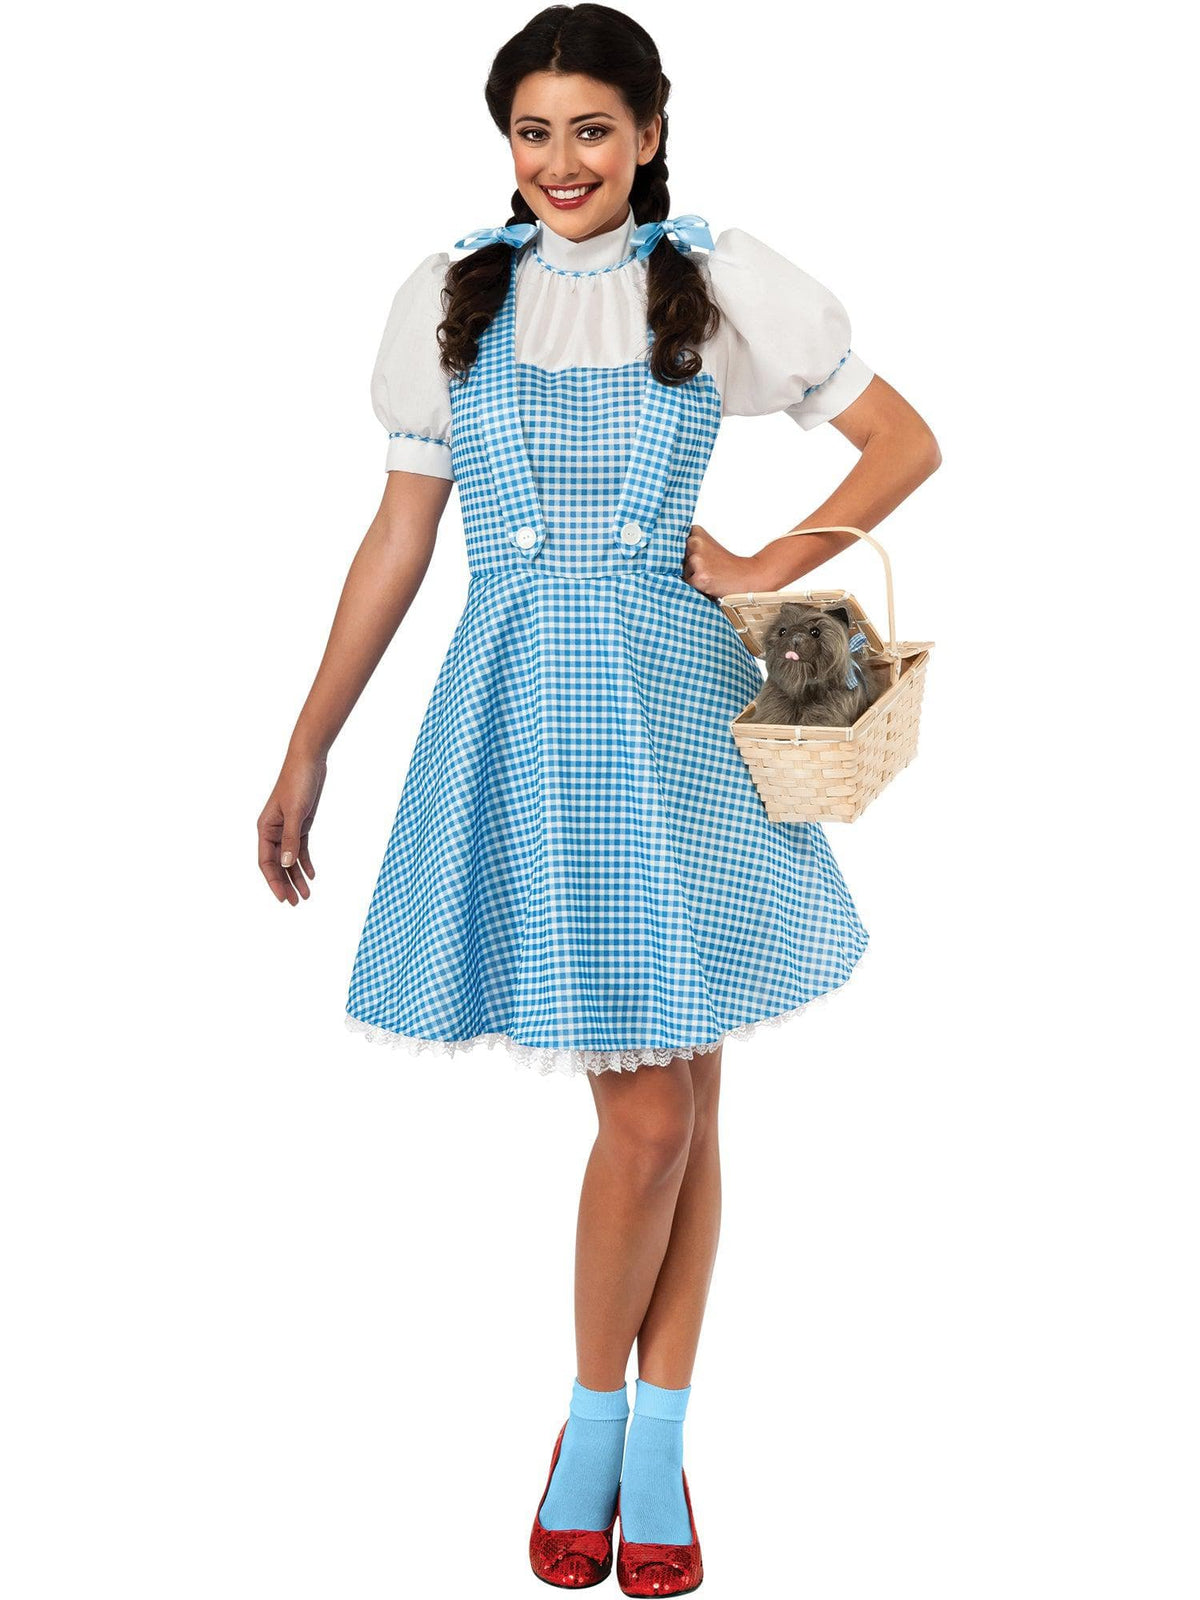 The Wizard of Oz Costumes for Kids, Adults, and Pets